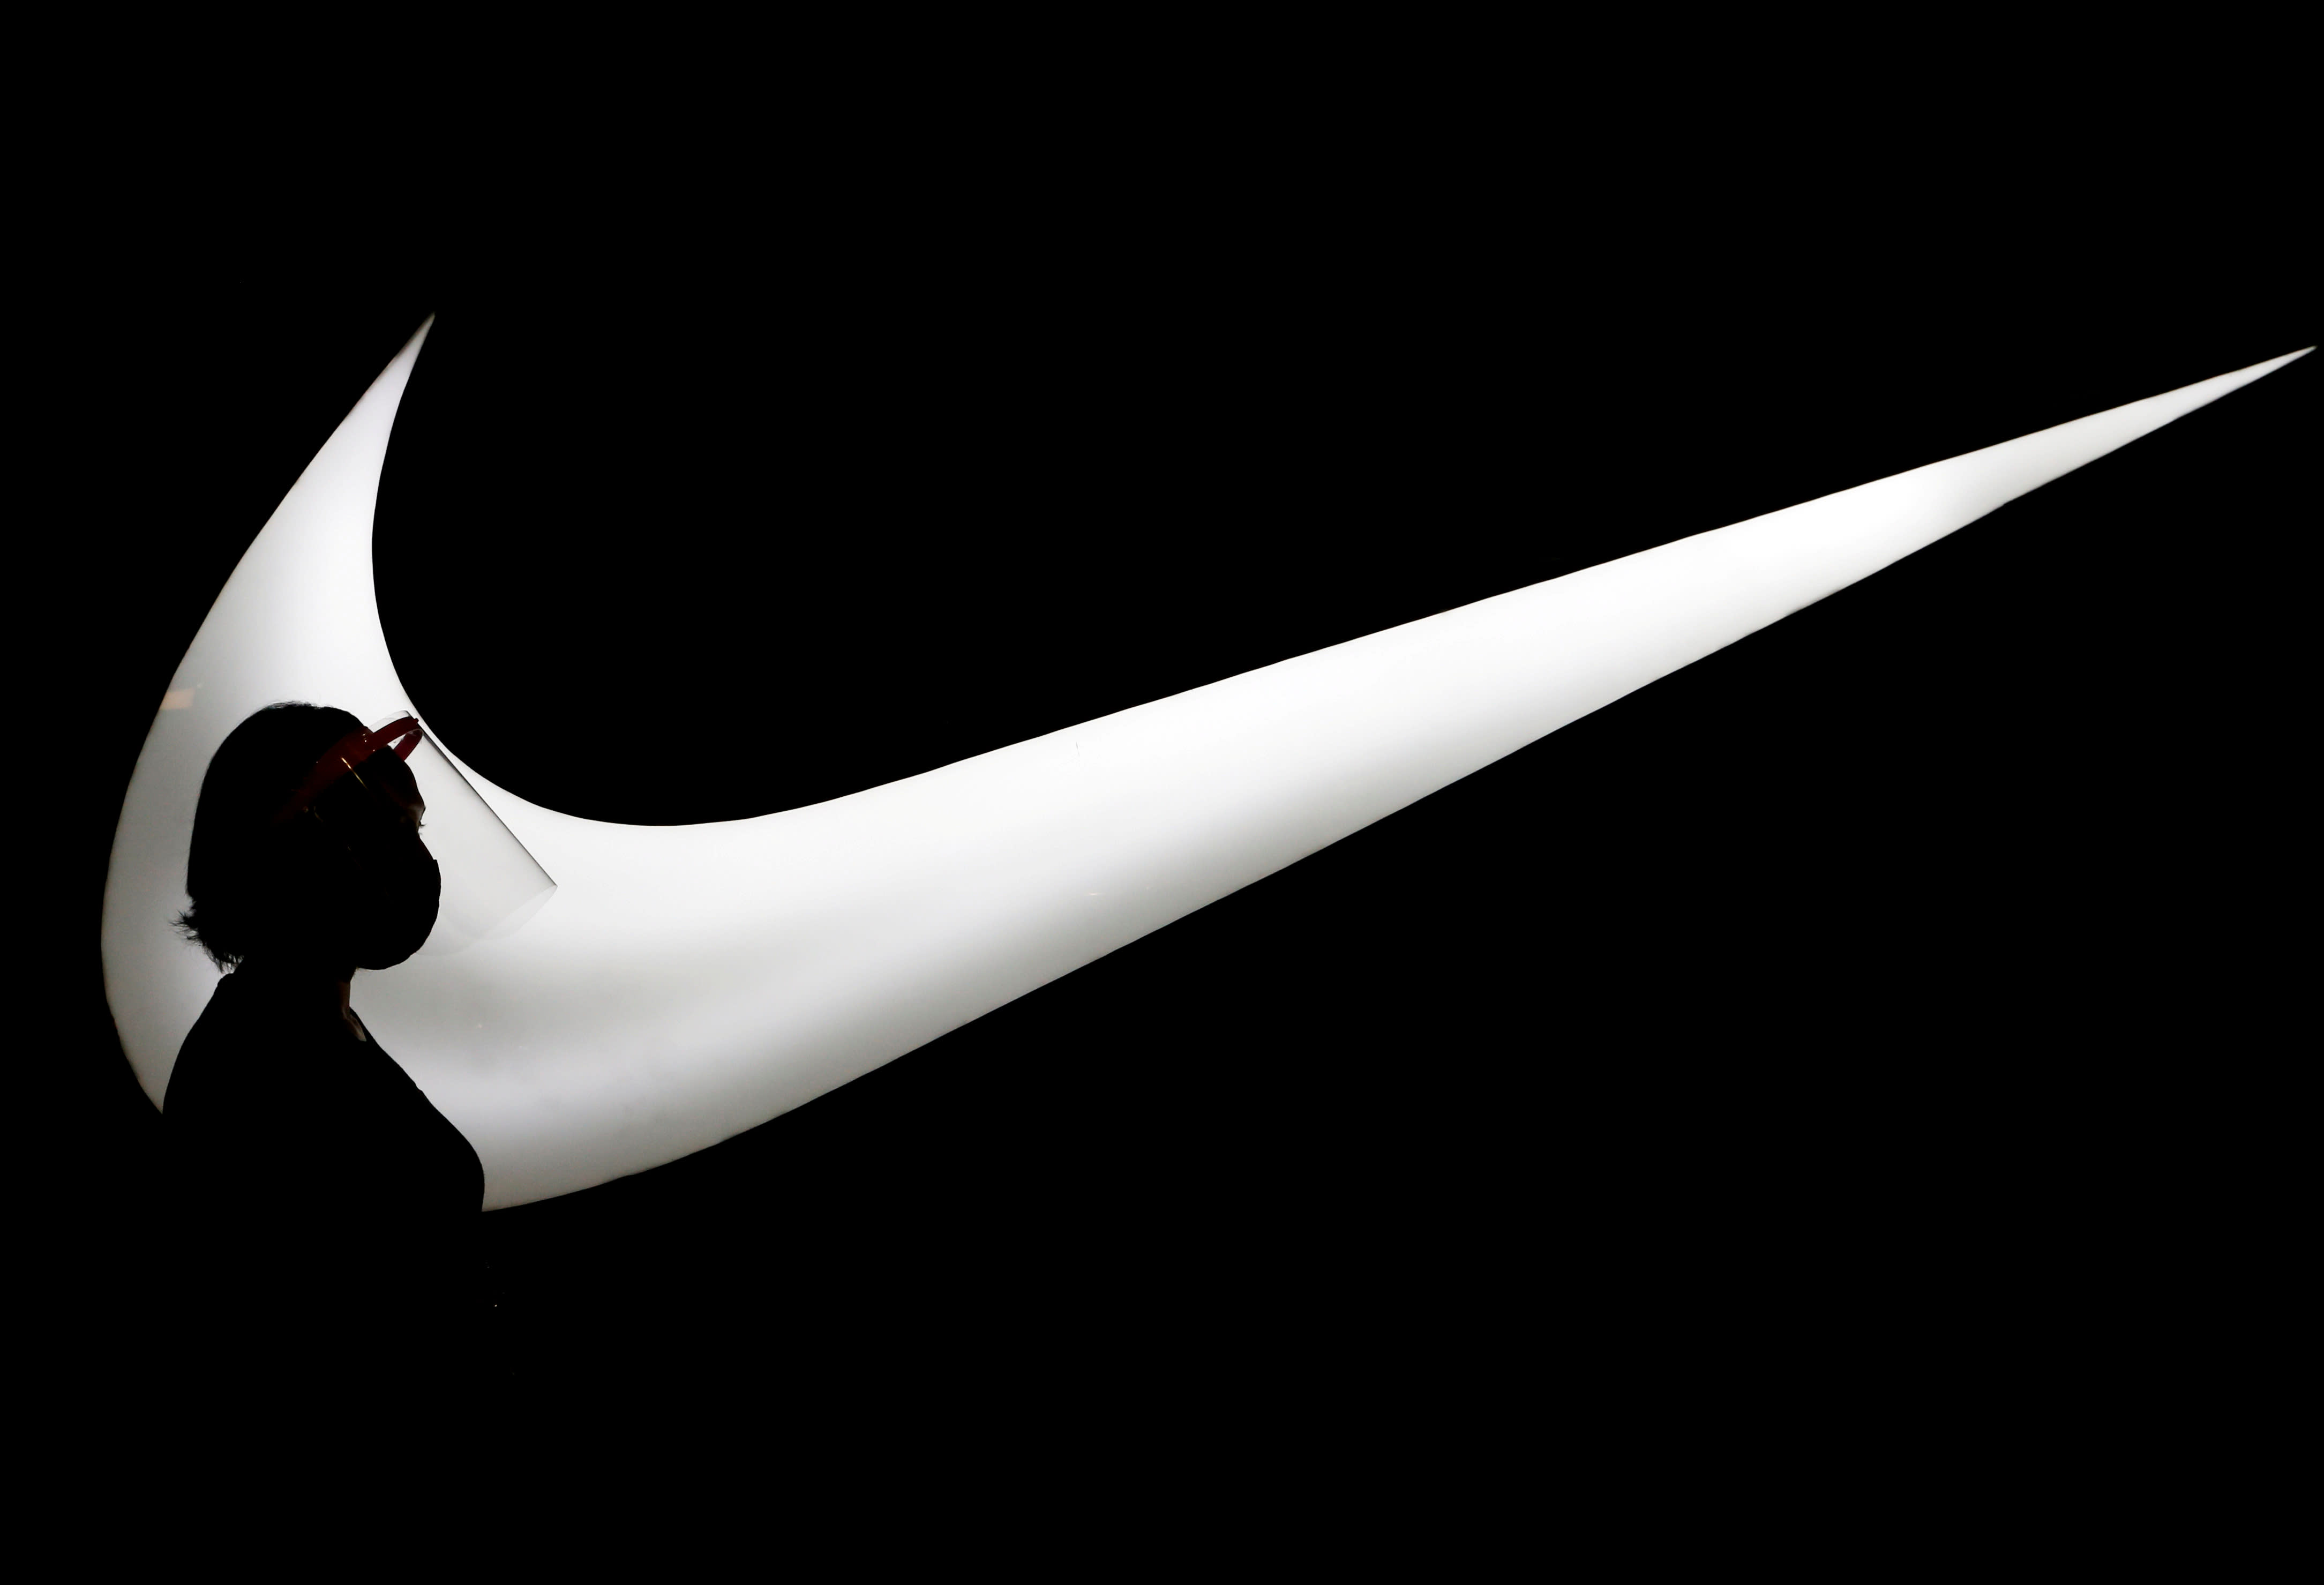 Nike is quietly preparing for the metaverse